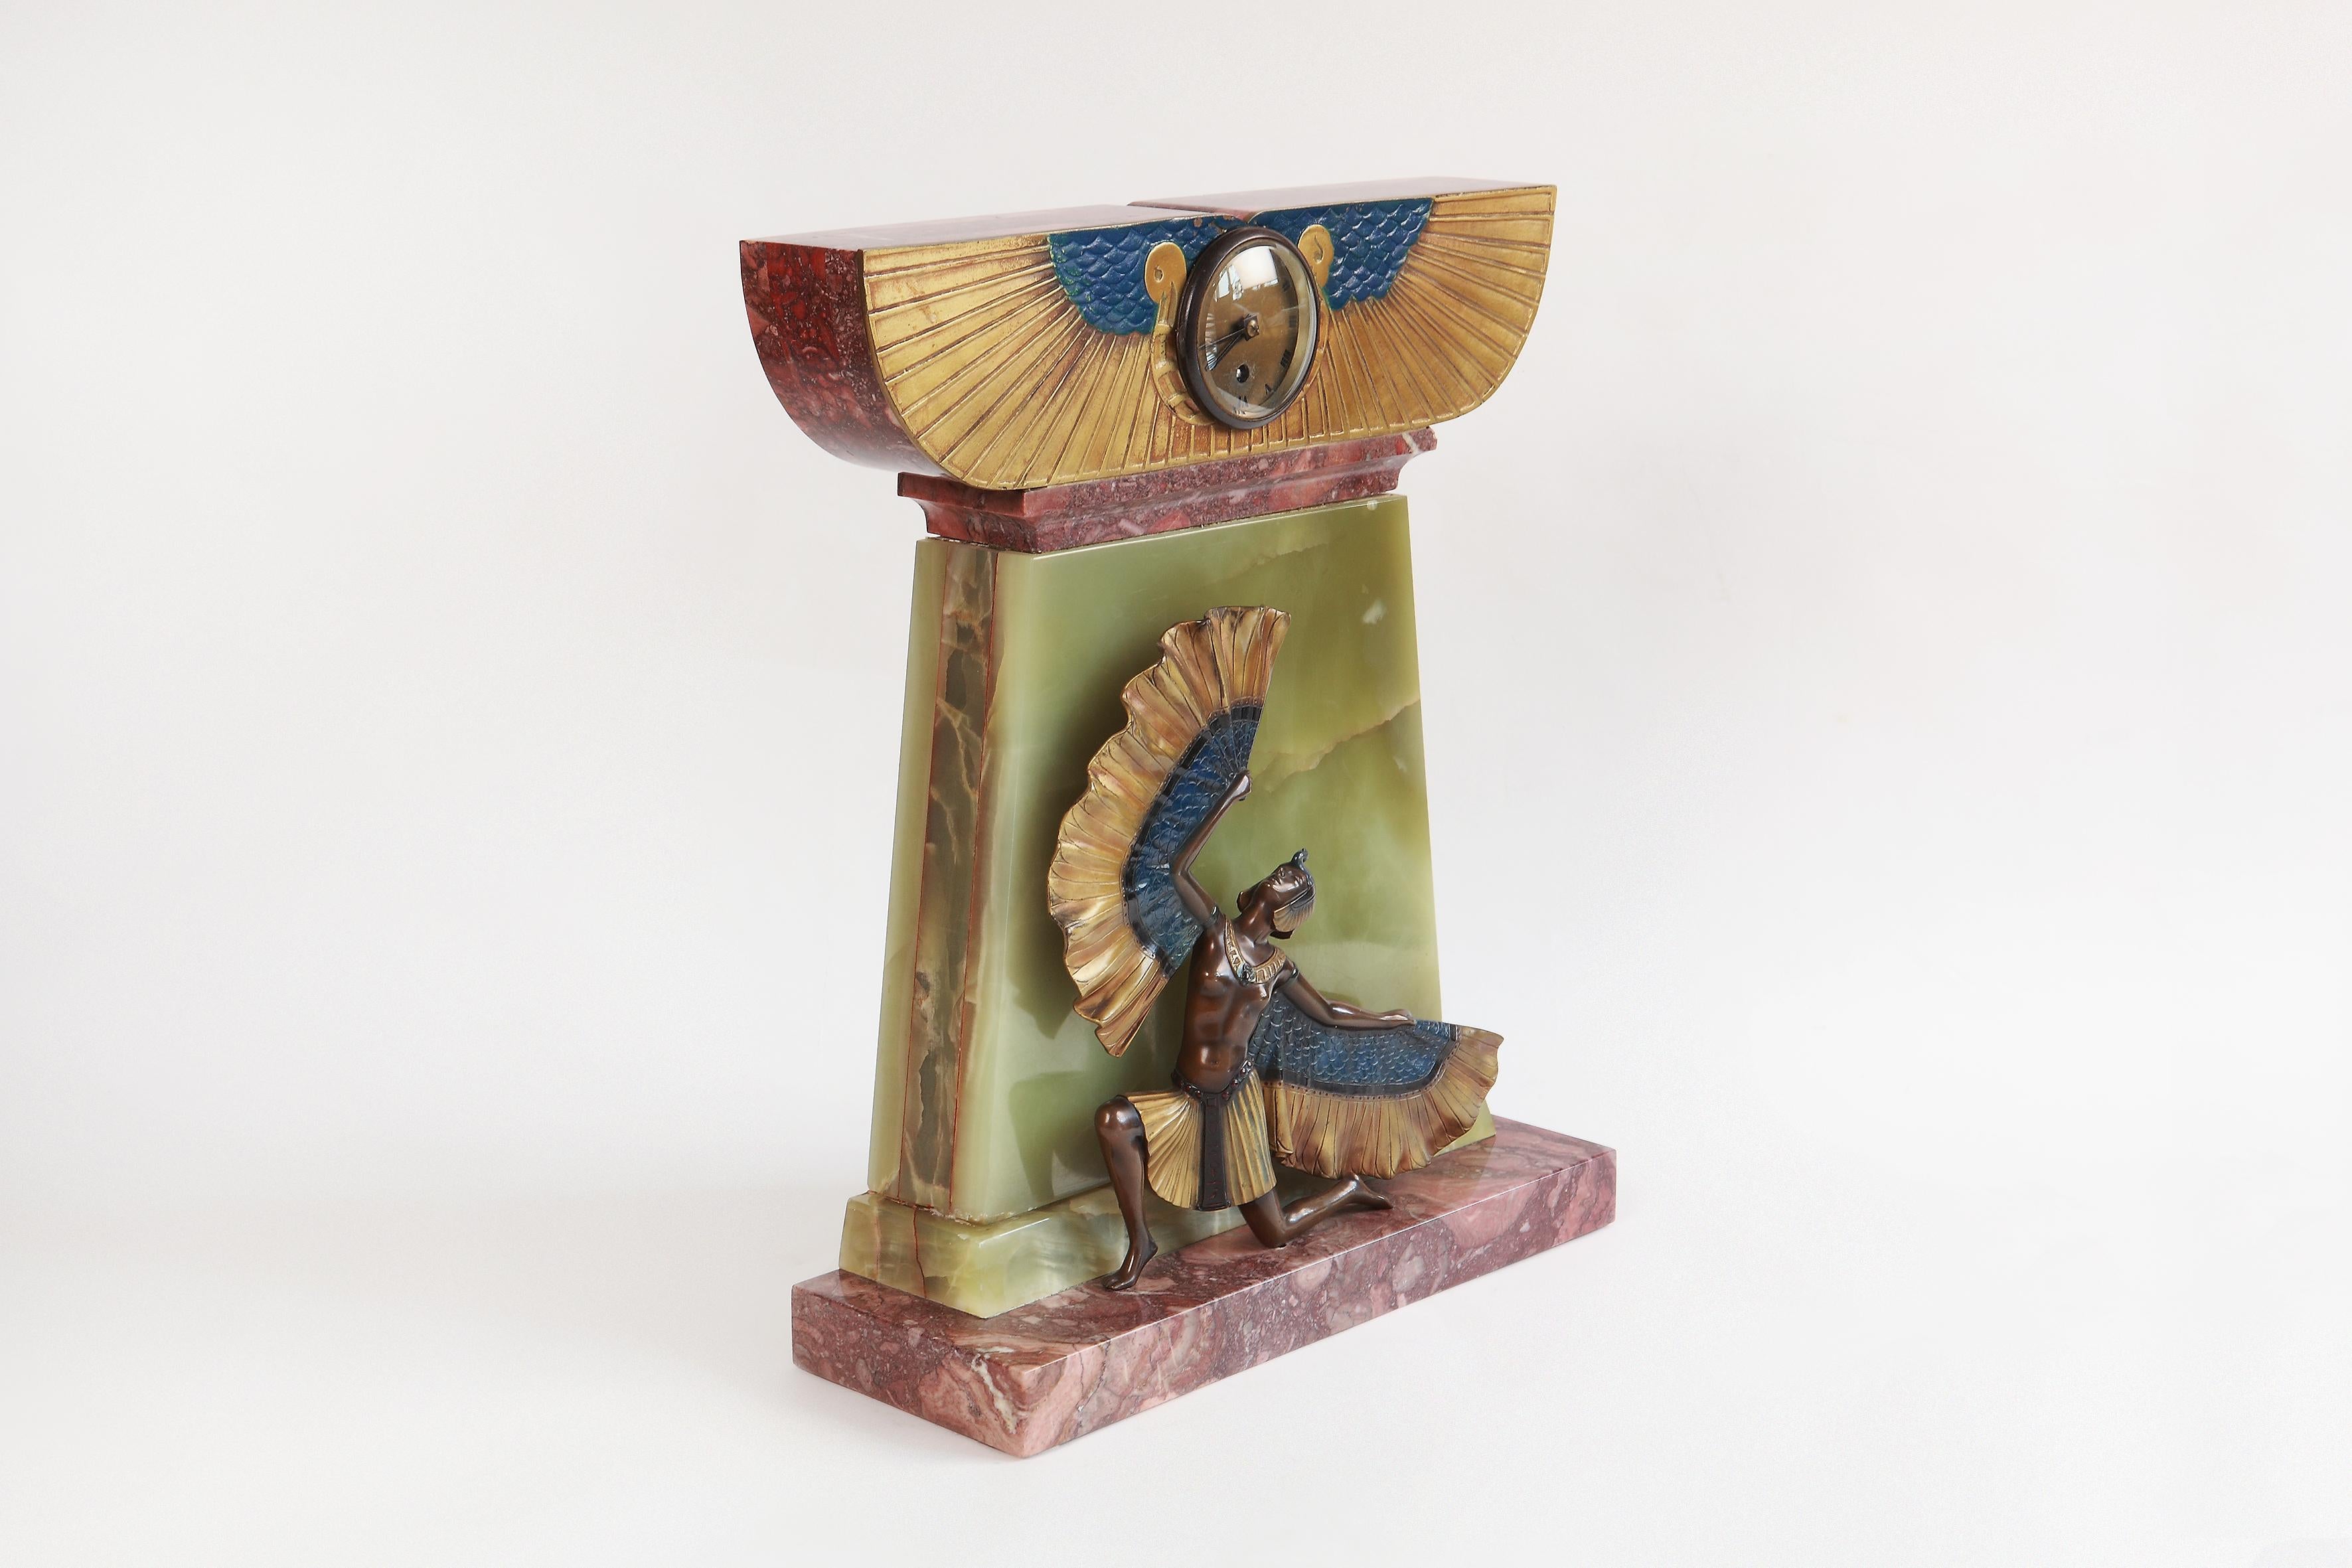 Art Deco mantel clock in Egyptian style, France, circa 1925. Bronze cold-painted, onyx, marble base. Signed top right on the base: KELETY.
Measurements: Height 20.47 in ( 52 cm ), Width 16.54 in ( 42 cm ), Depth 5.91 in ( 15 cm )

Alexander Kéléty,